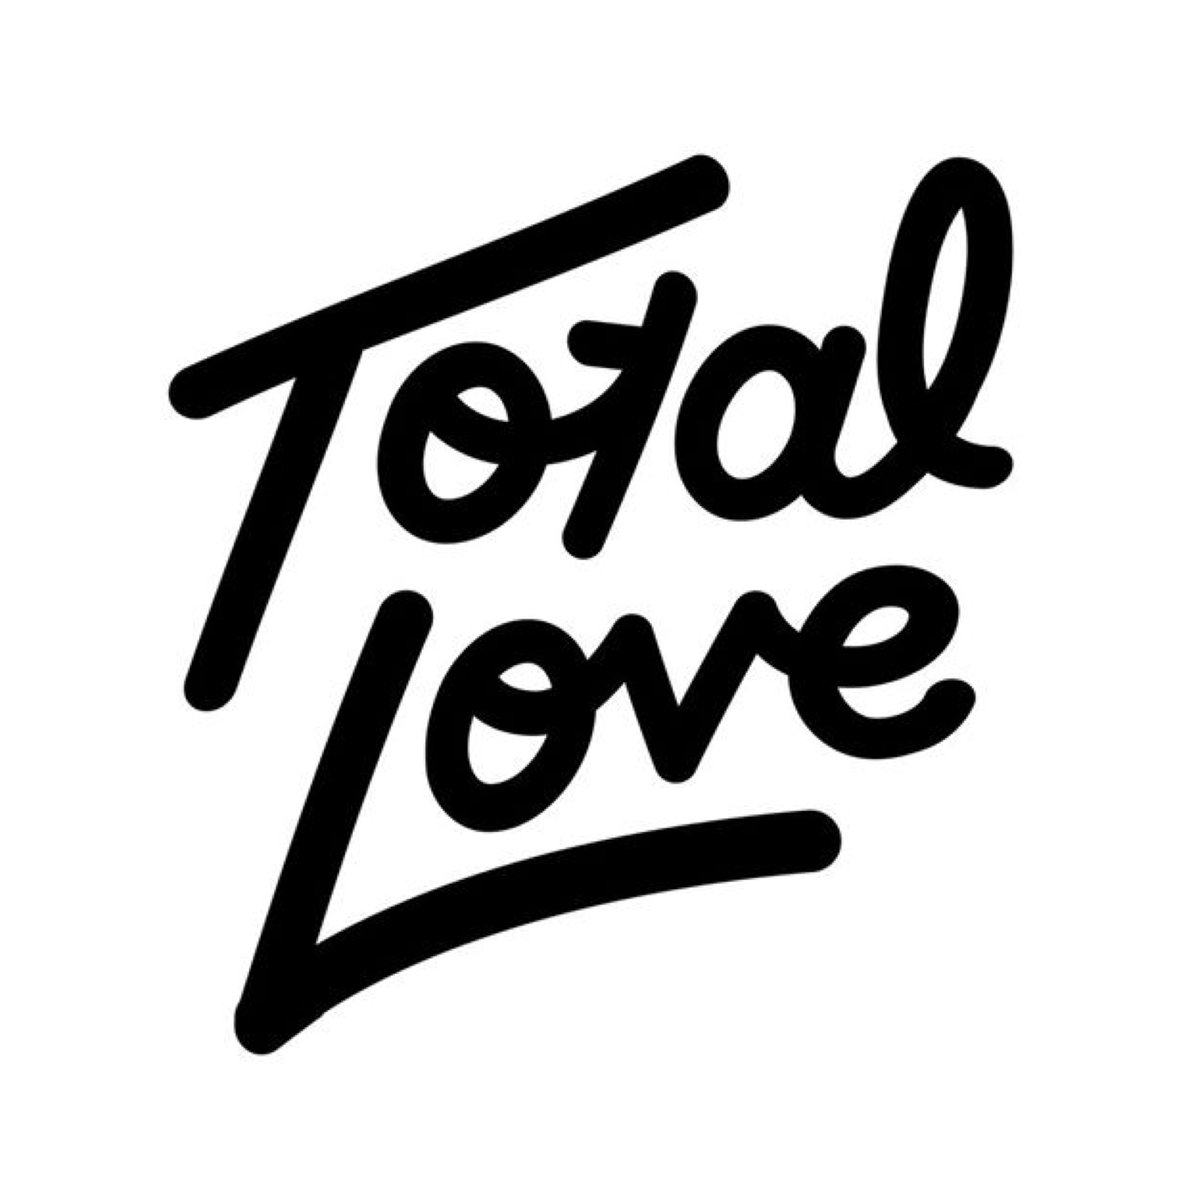 [Story] Total Love (Complete Episodes)